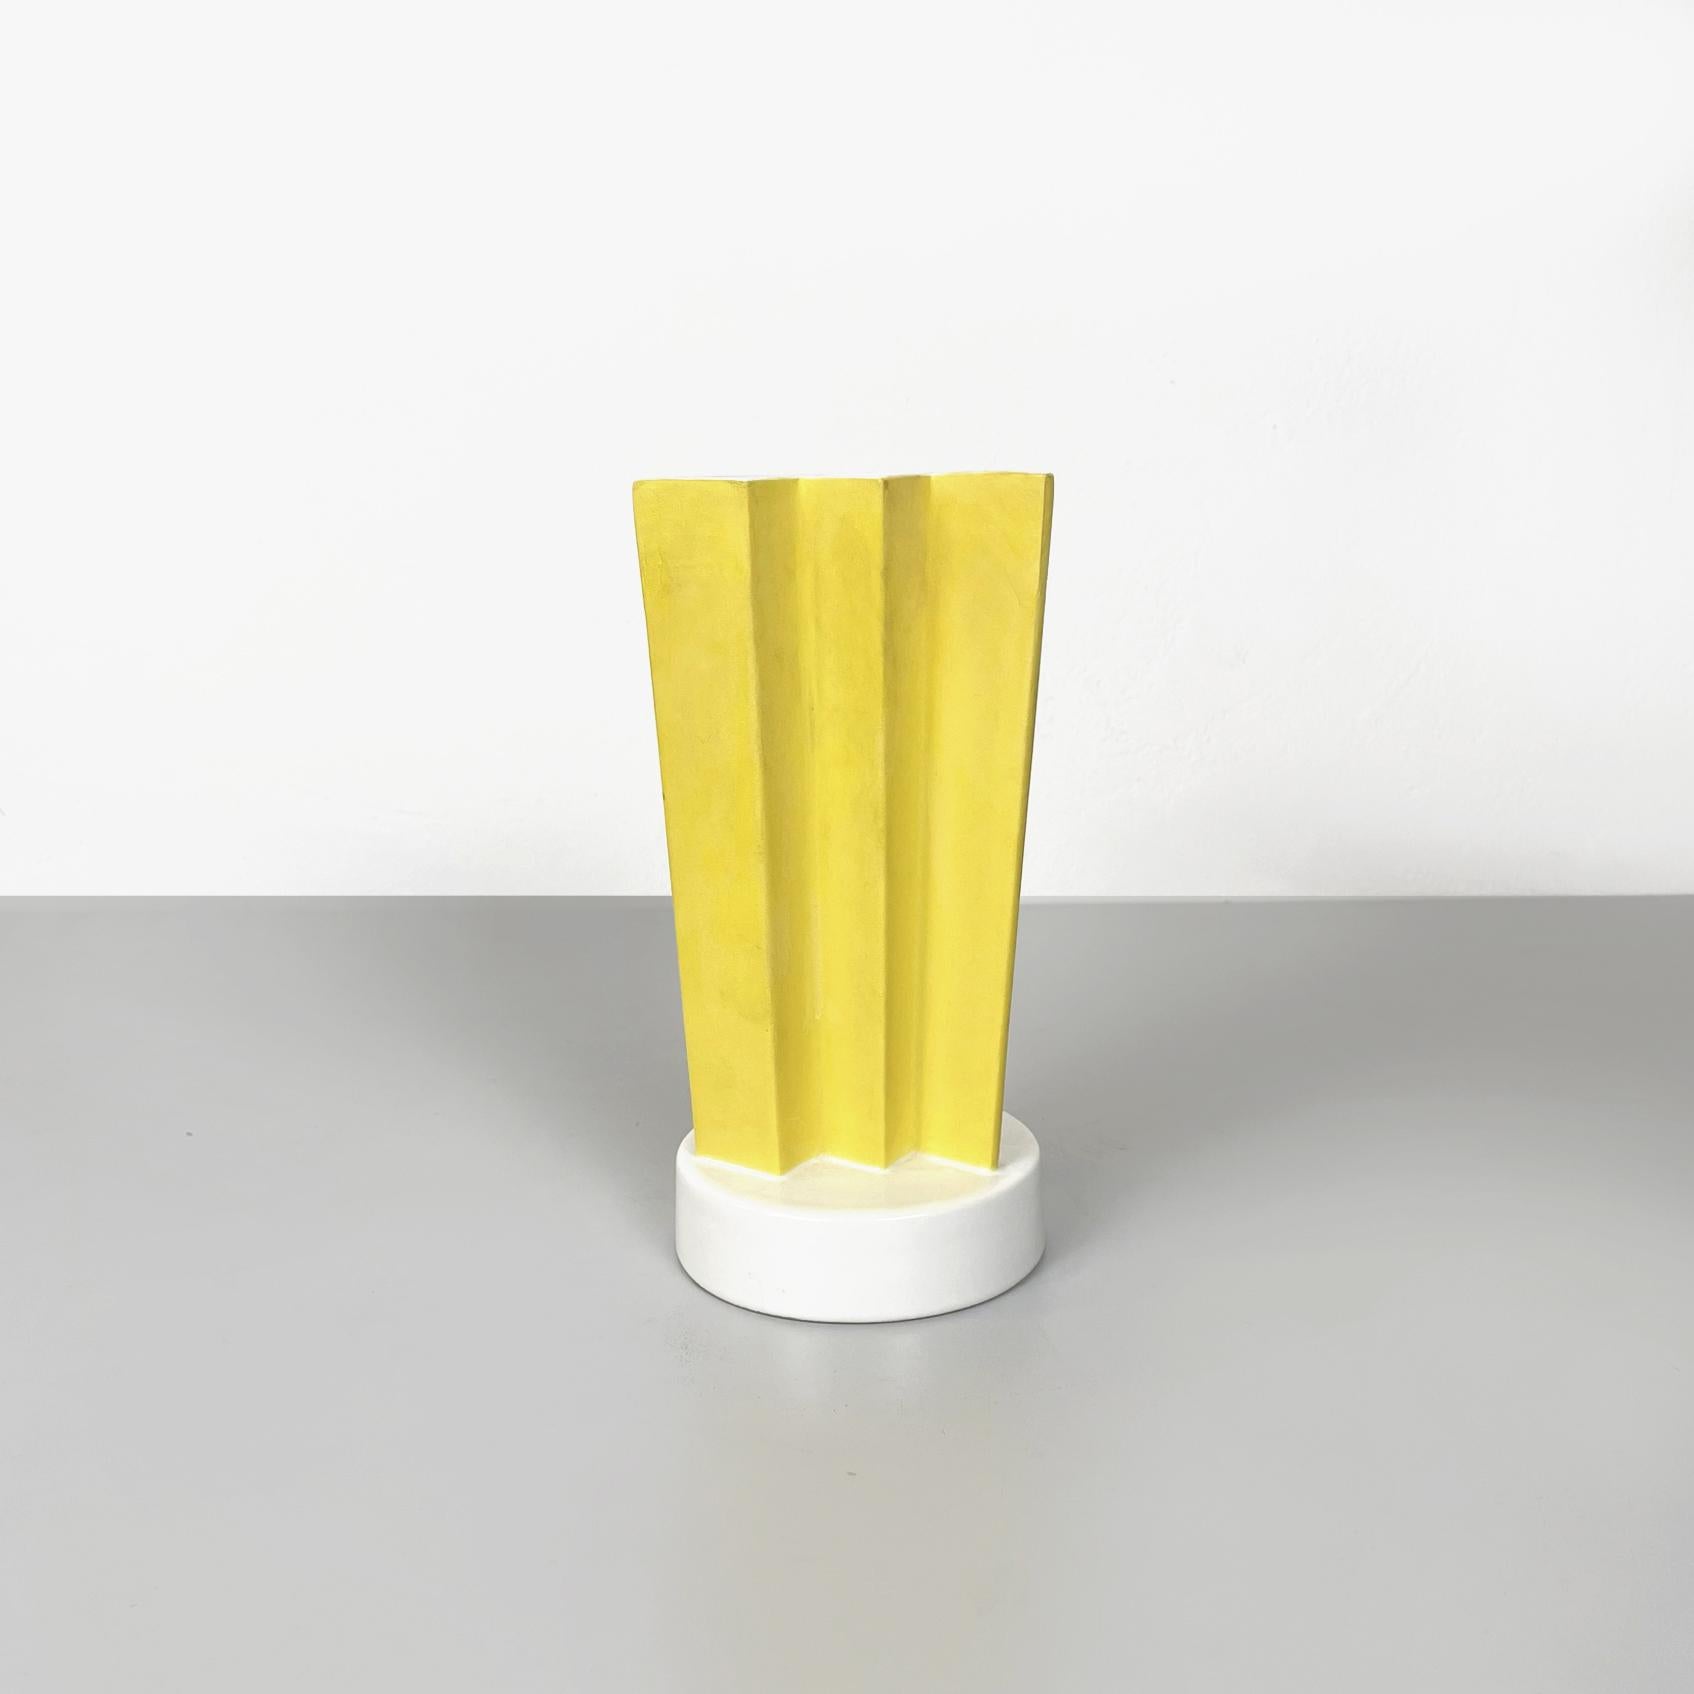 Italian modern yellow ceramic Vase ET1 by Ettore Sottsass for A. Sarri, 1990s
Rare and elegant vase mod. ET1 with round base in ceramic painted in yellow and glazed in white. The structure is composed of a semi-round shaped part and a zig-zag part.